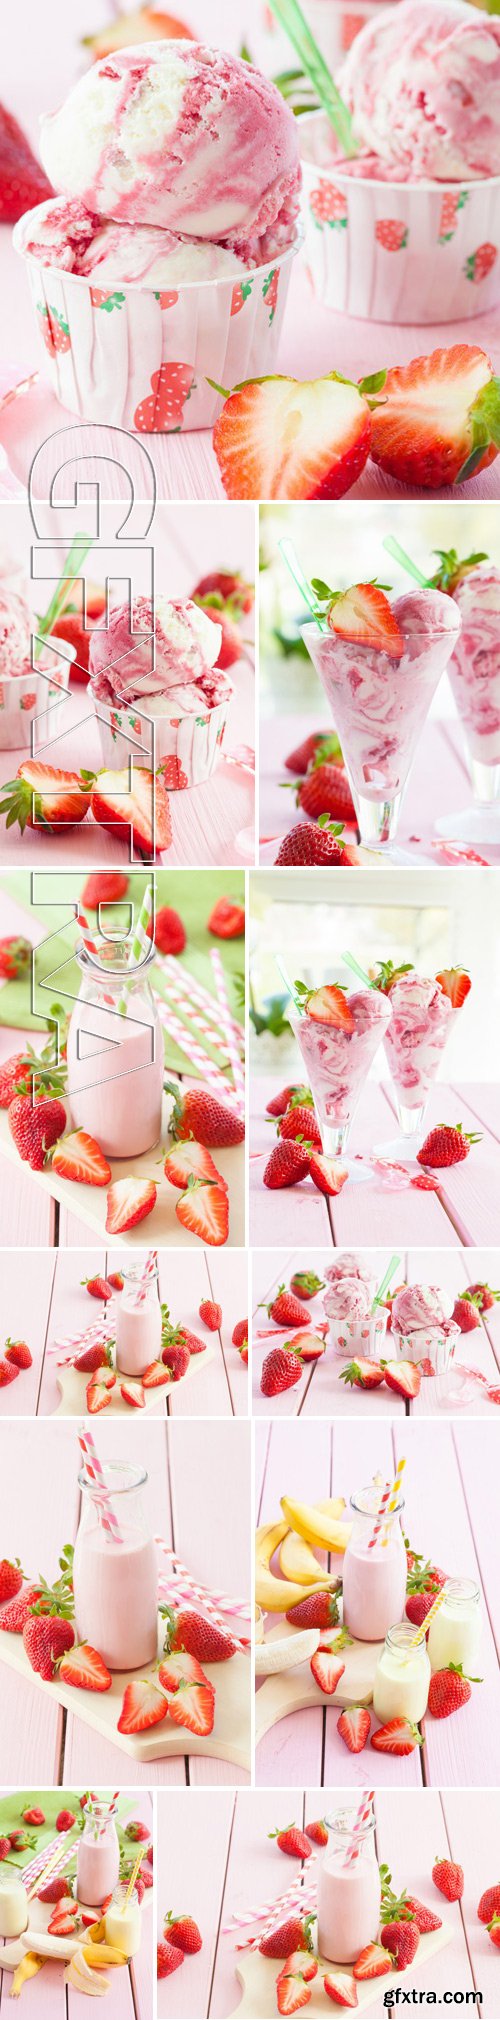 Stock Photos - Ice Cream With Fresh Strawberries On Pink Wooden Boards